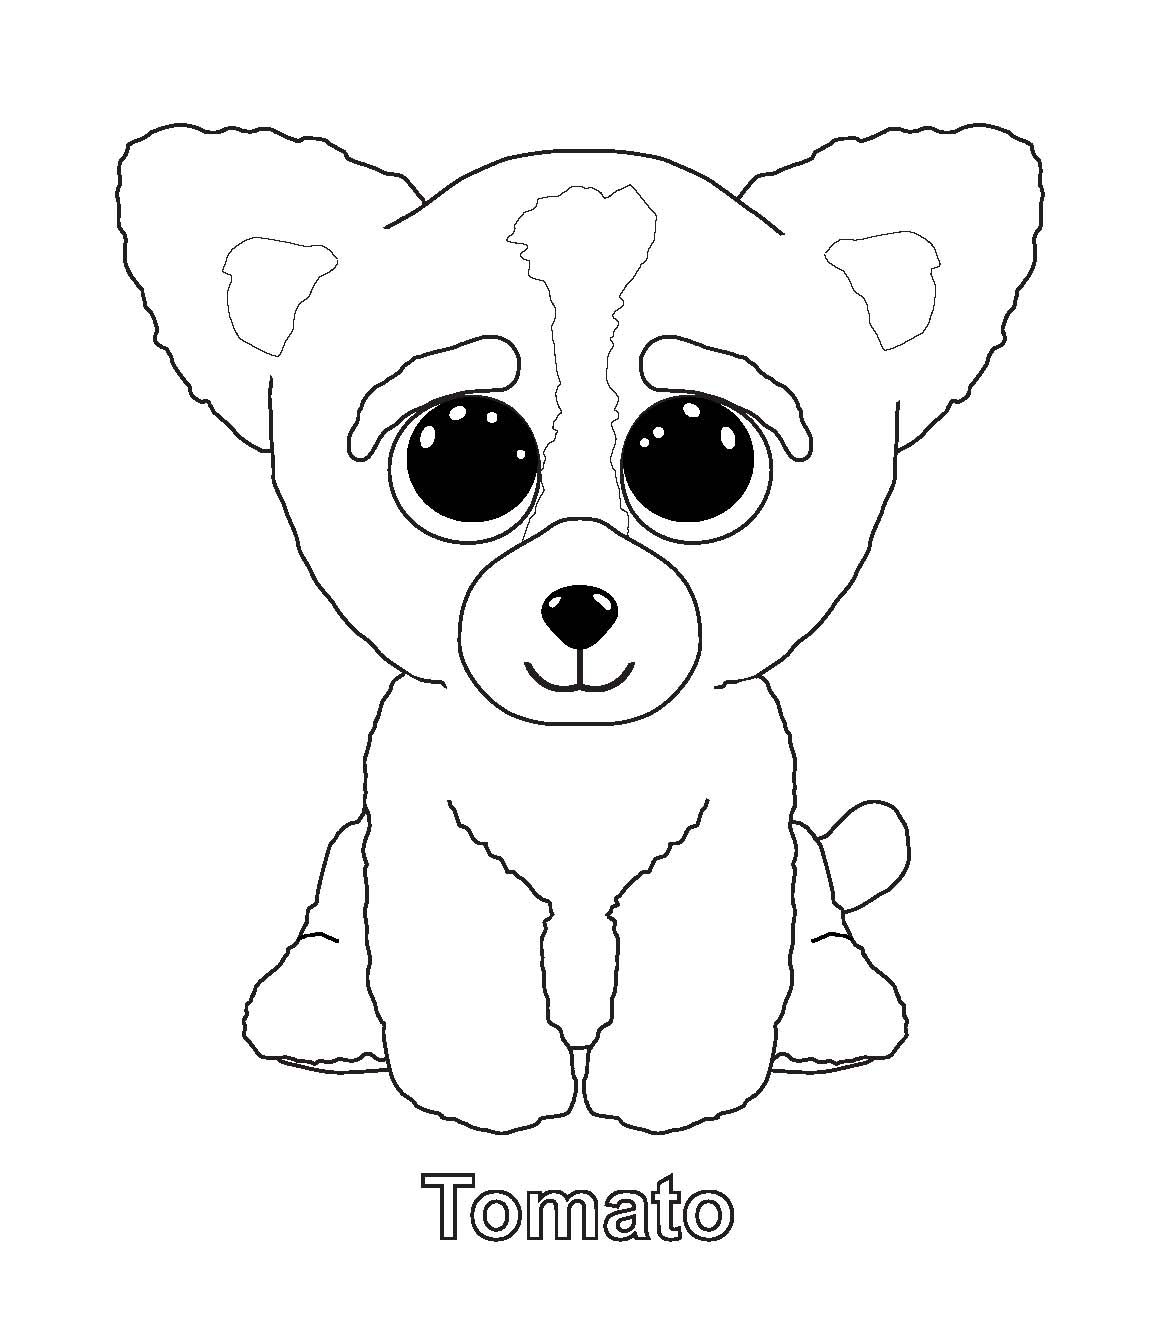 Tomato - Beanie Boo Coloring Pages